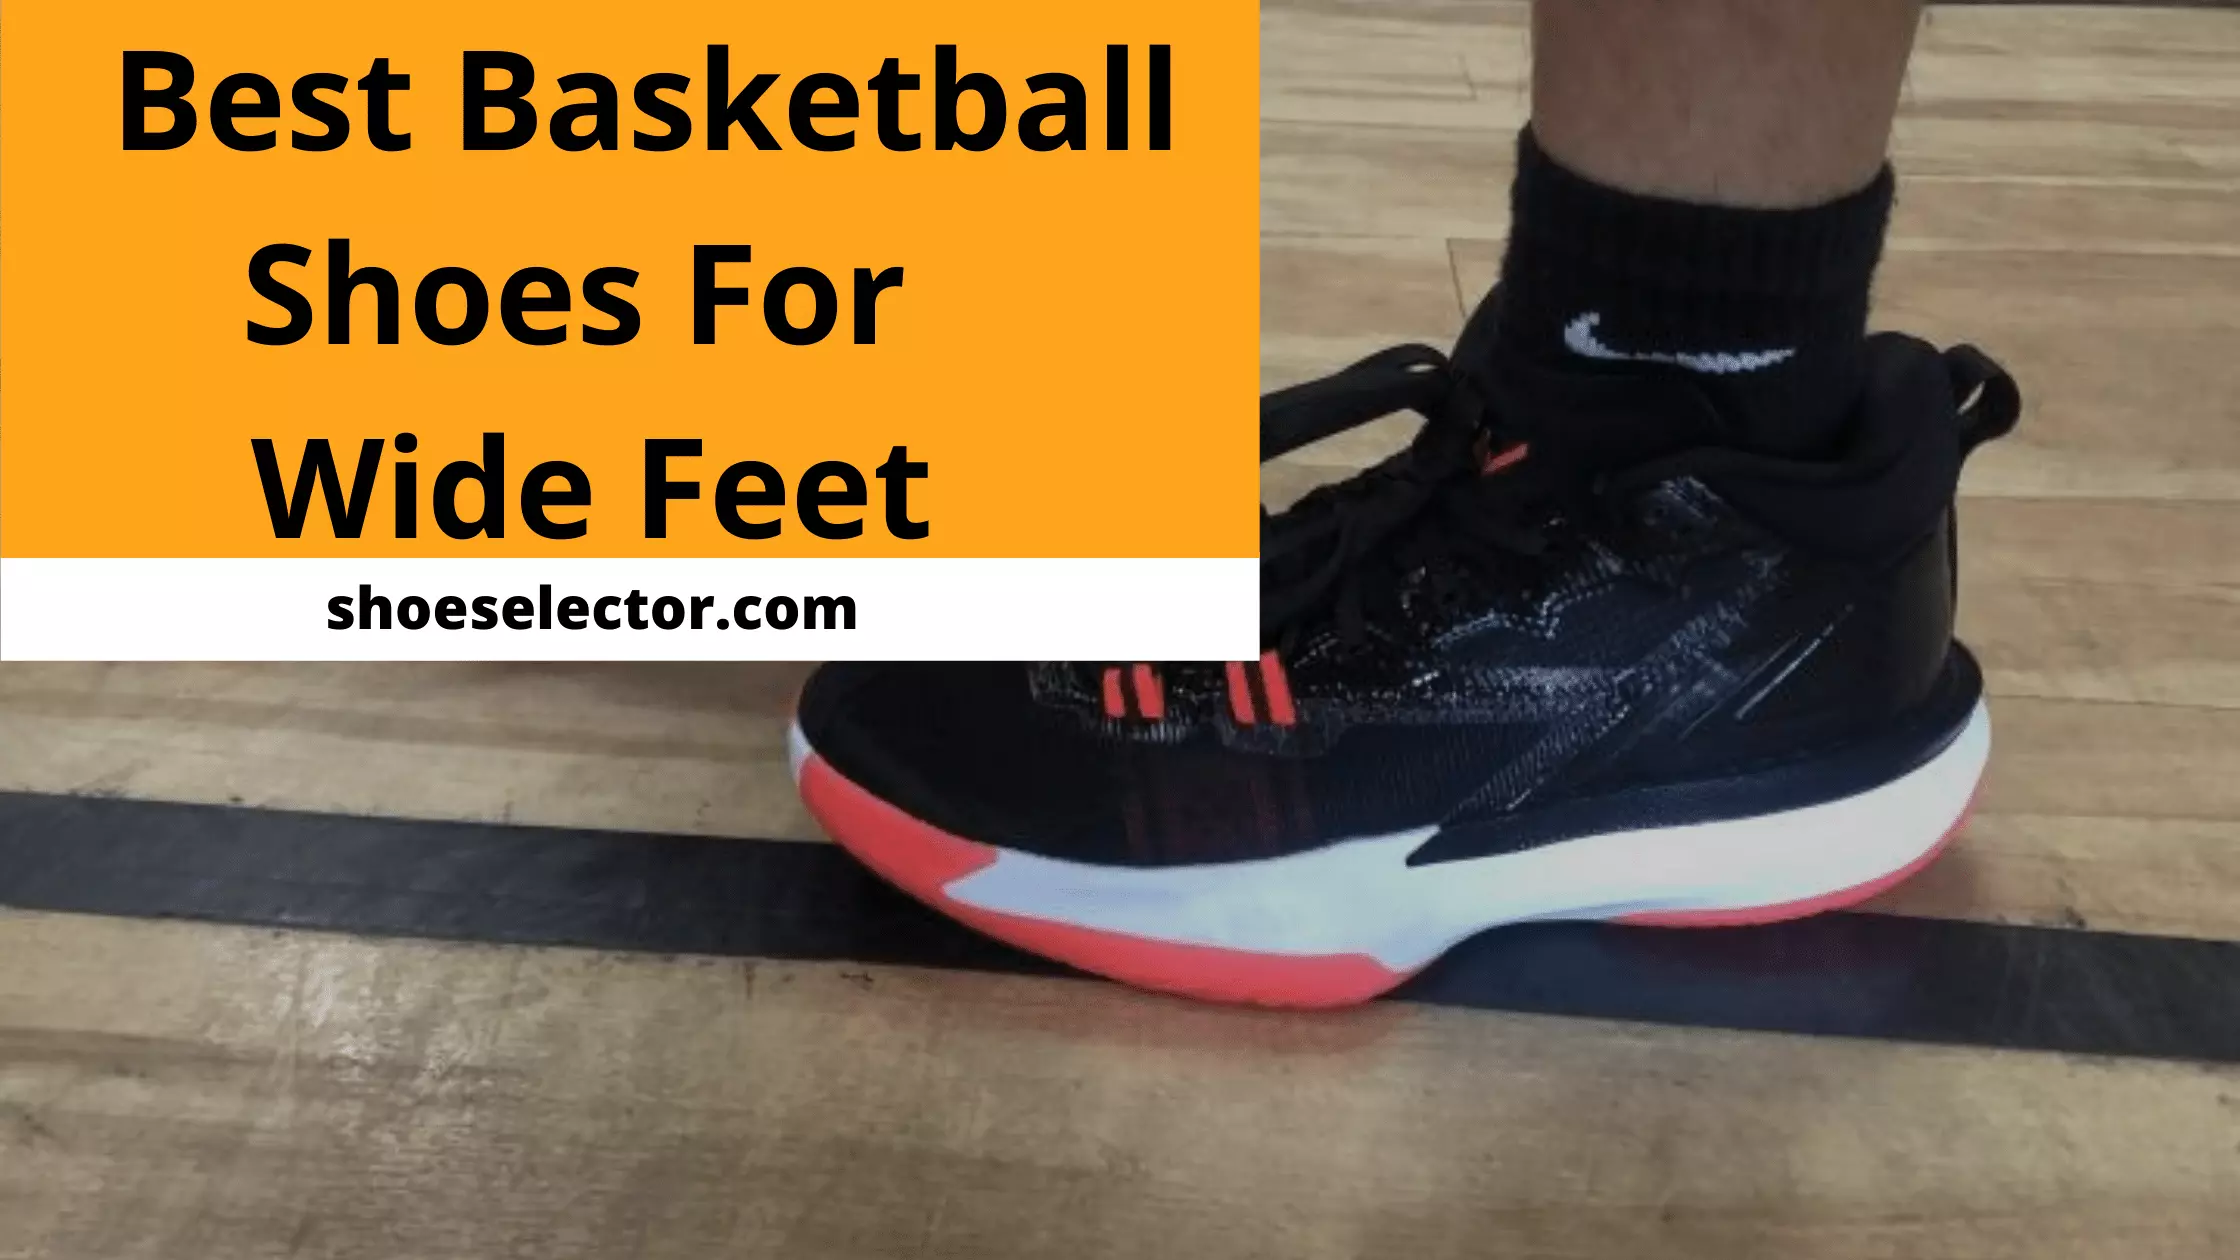 Best Basketball Shoes For Wide Feet - Perfect Fit